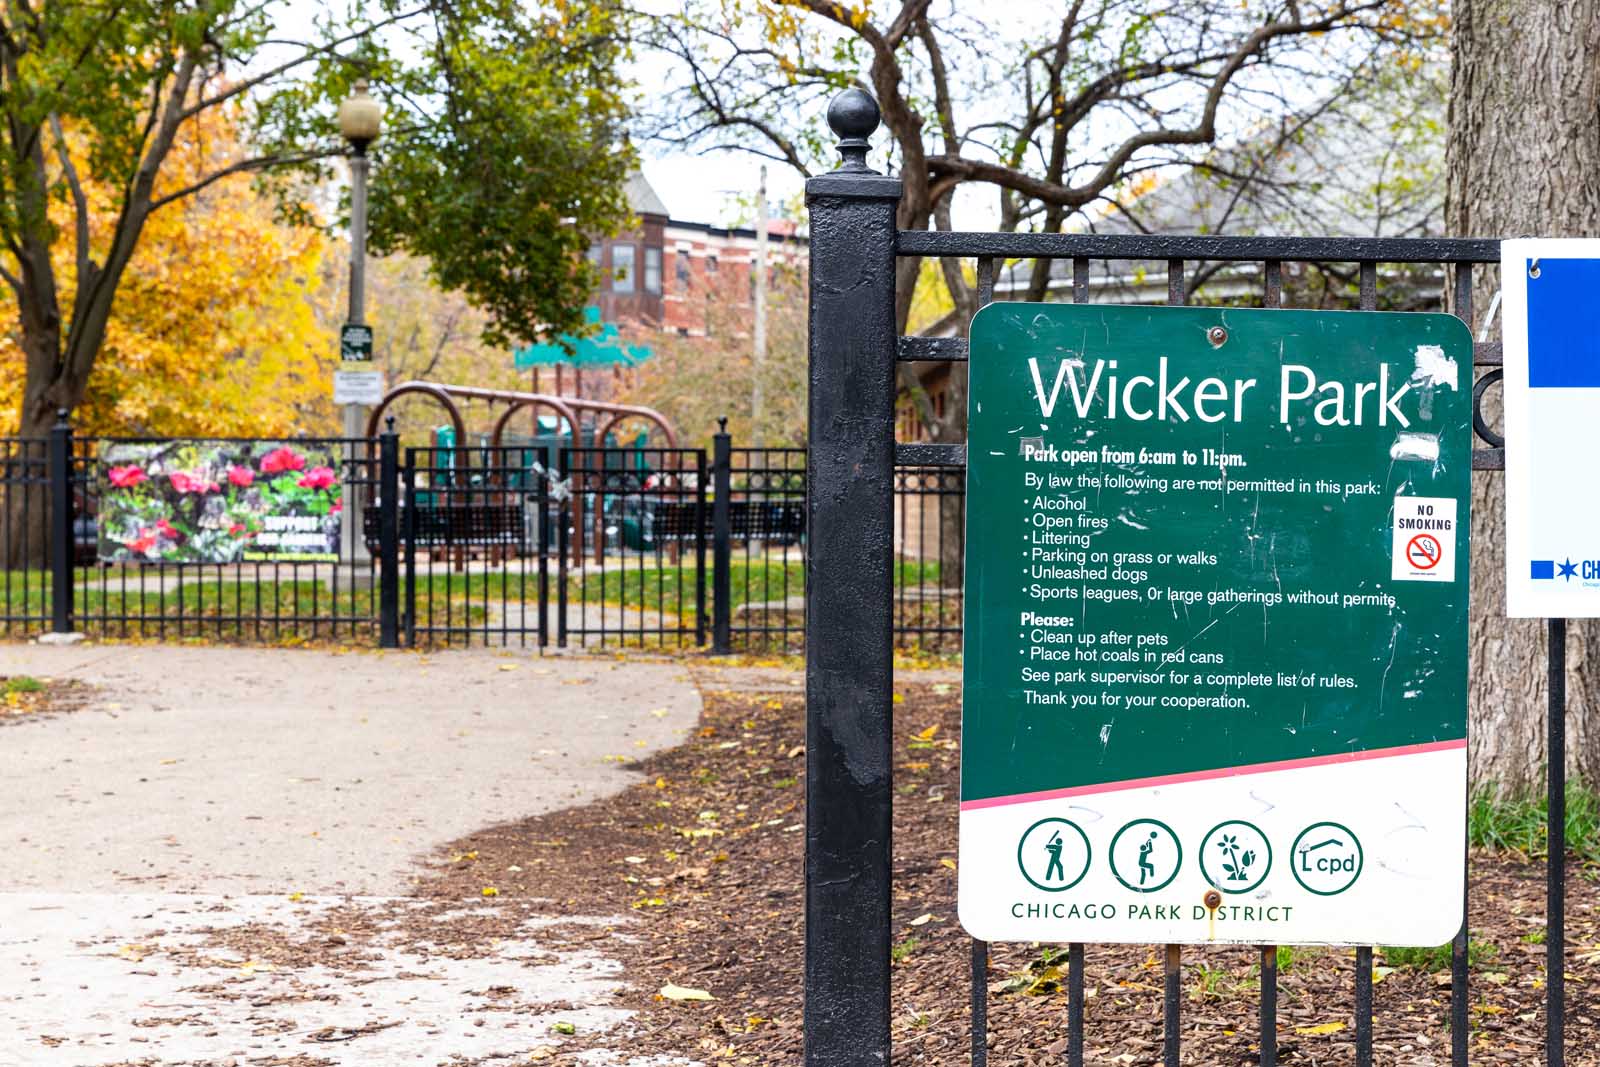 Where to stay in Chicago Wicker Park